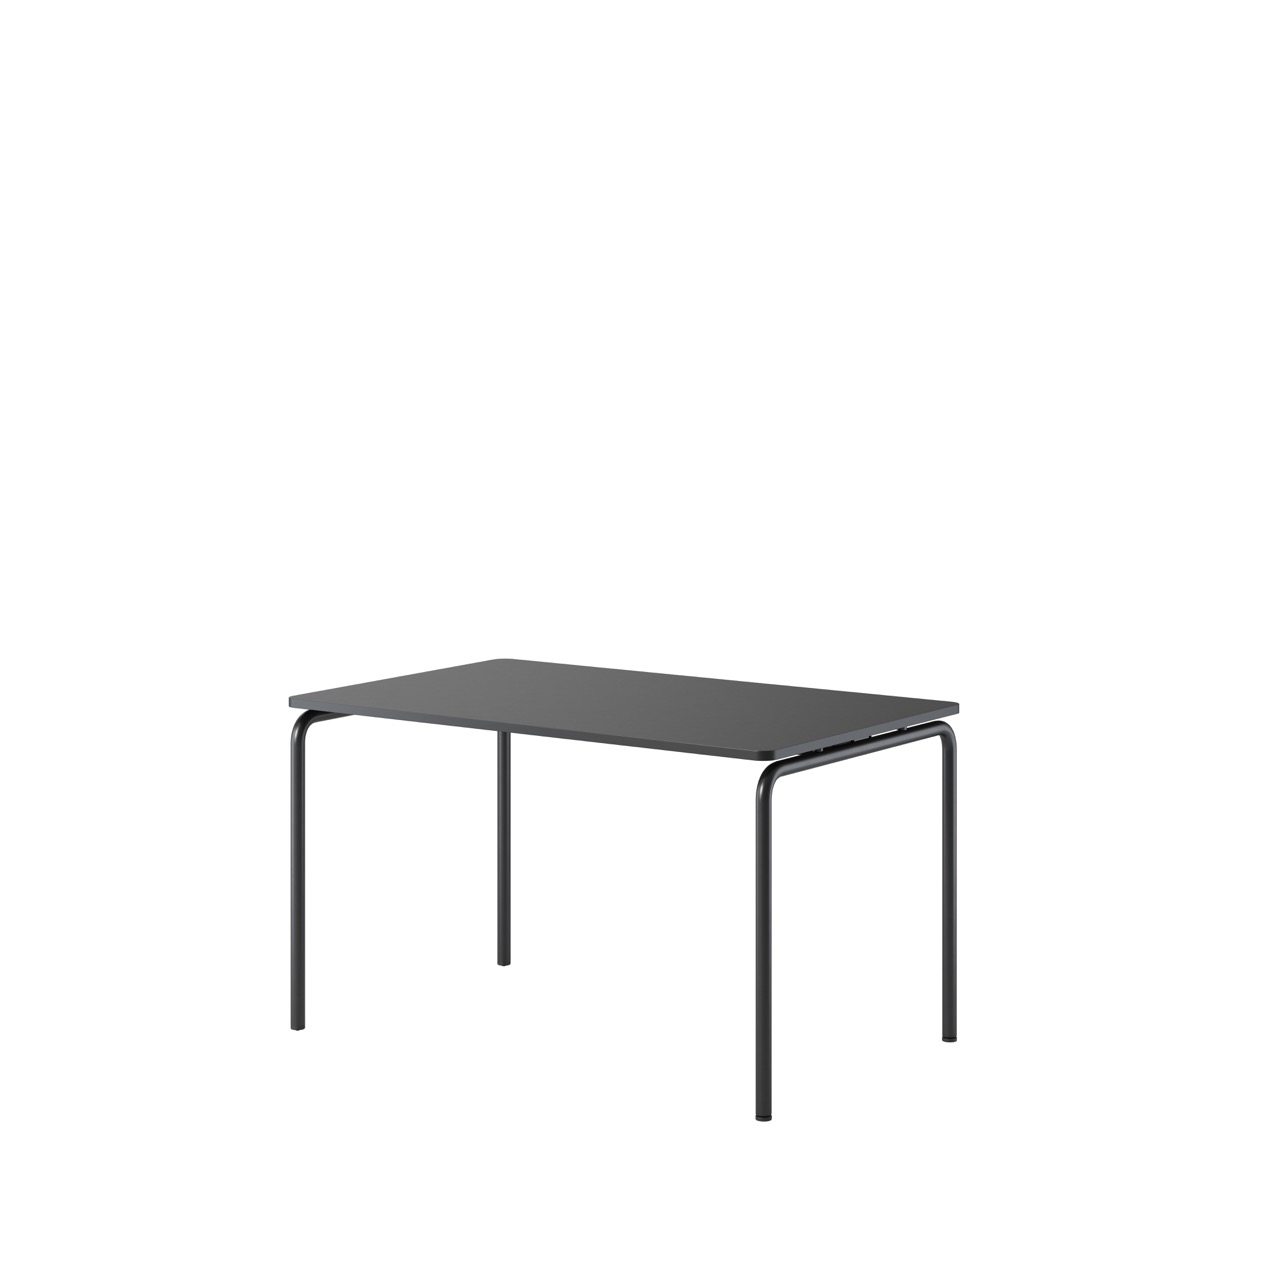 OCEE&FOUR - Tables - FourReal 74 - 120 x 80 - Straight -Packshot Image 2 Large